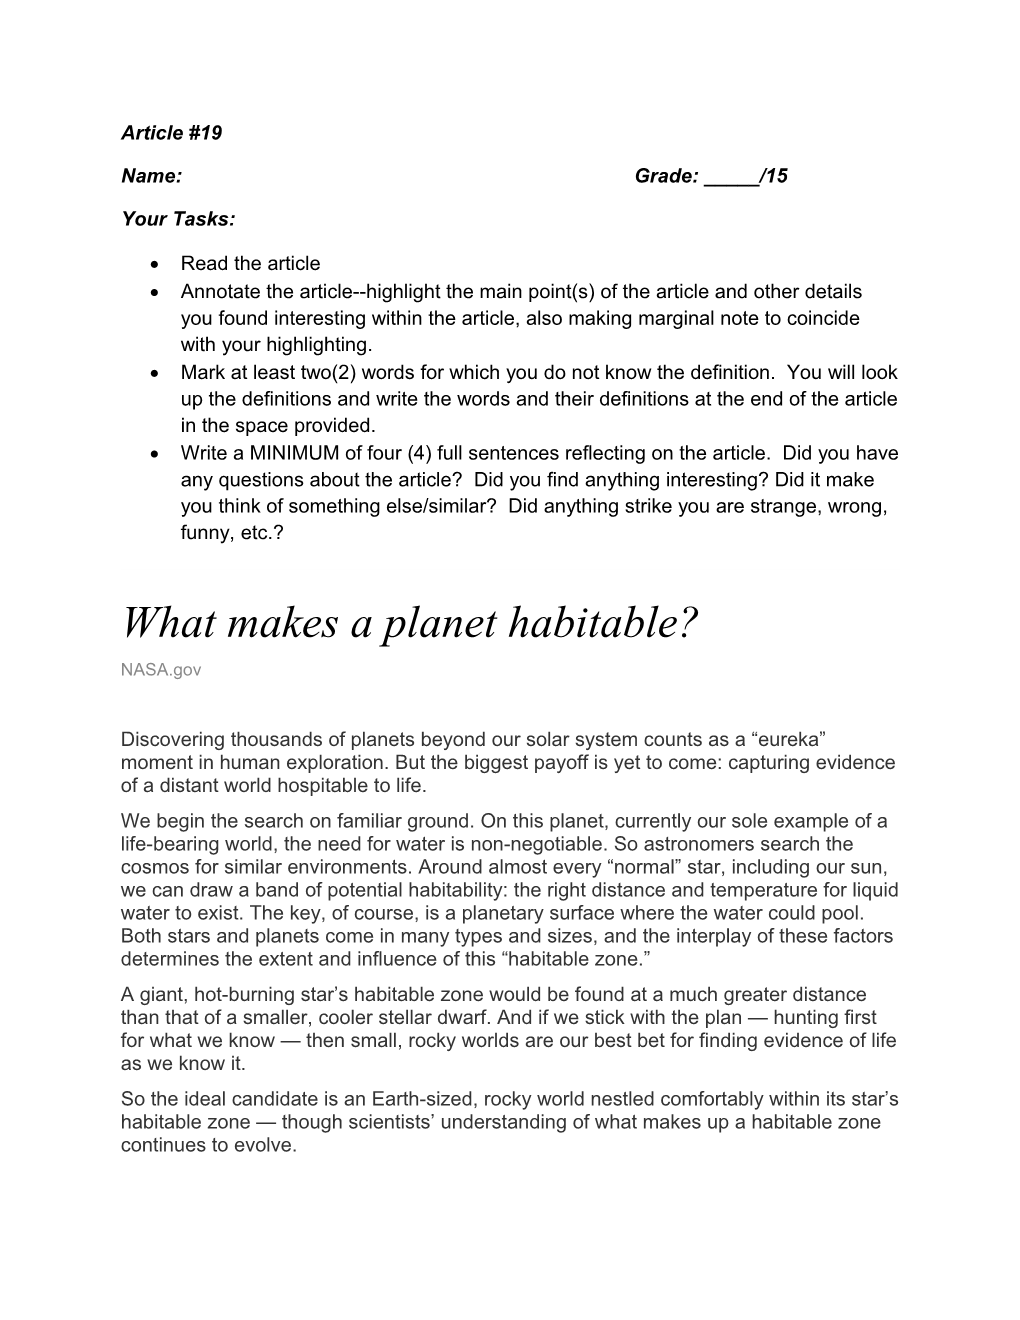 What Makes a Planet Habitable?